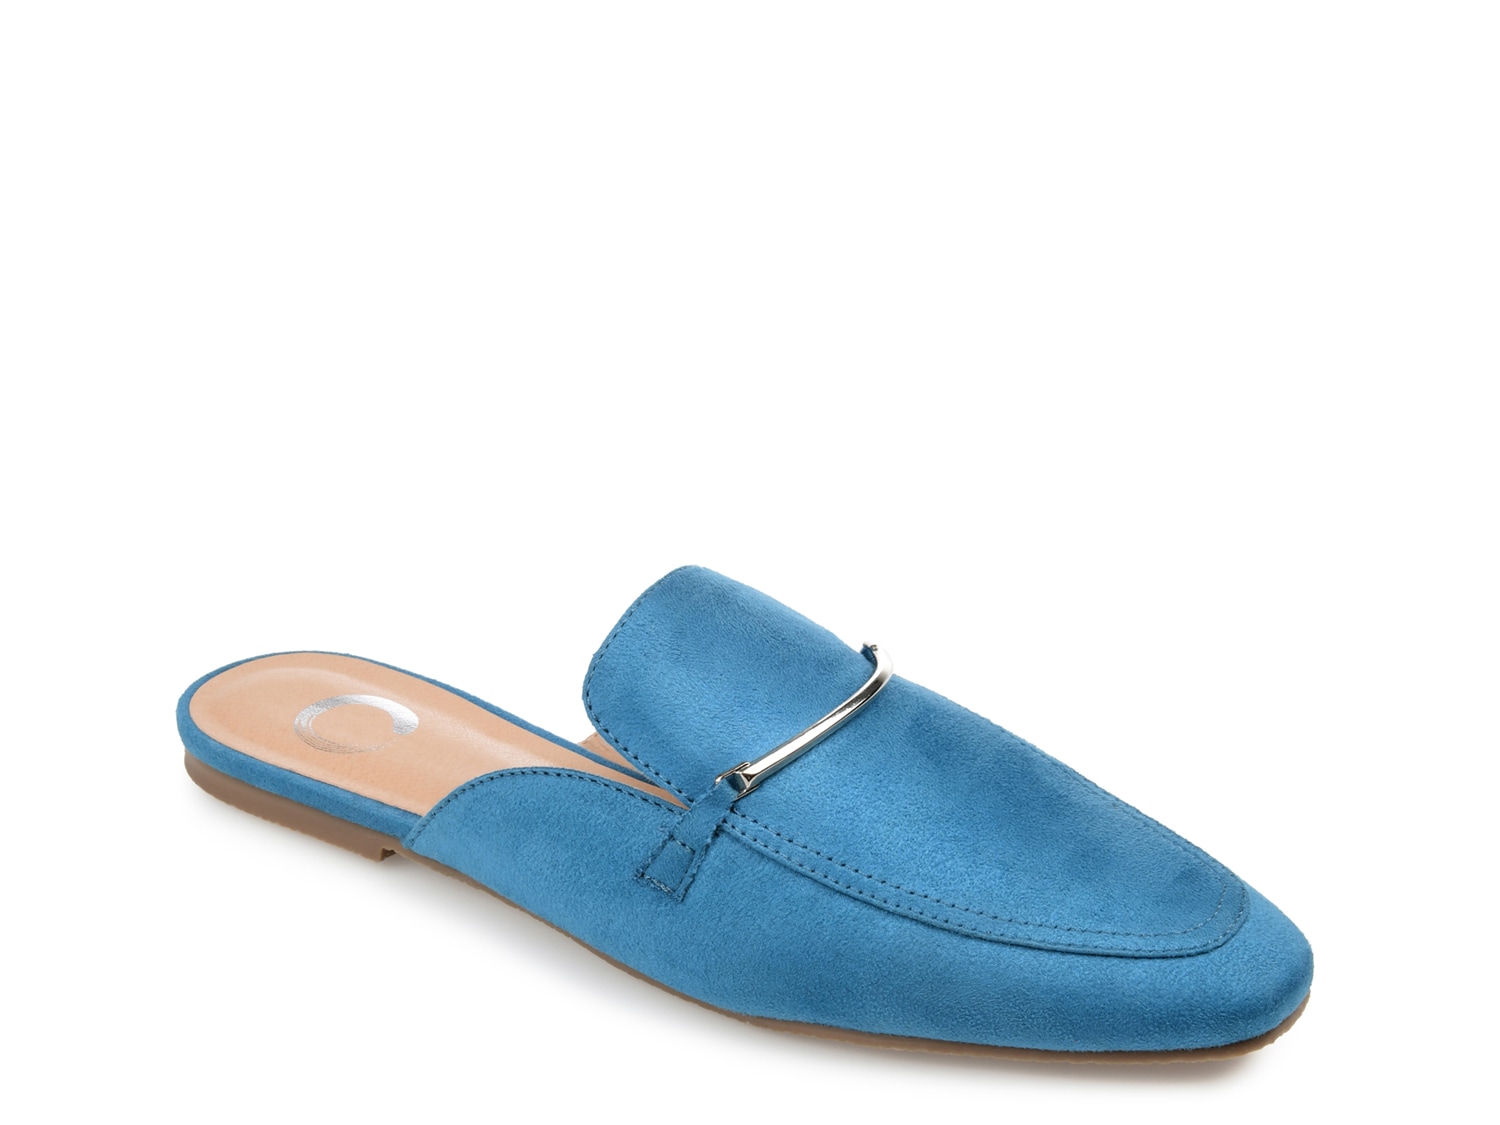 Journee Collection Ameena Mule - Free Shipping